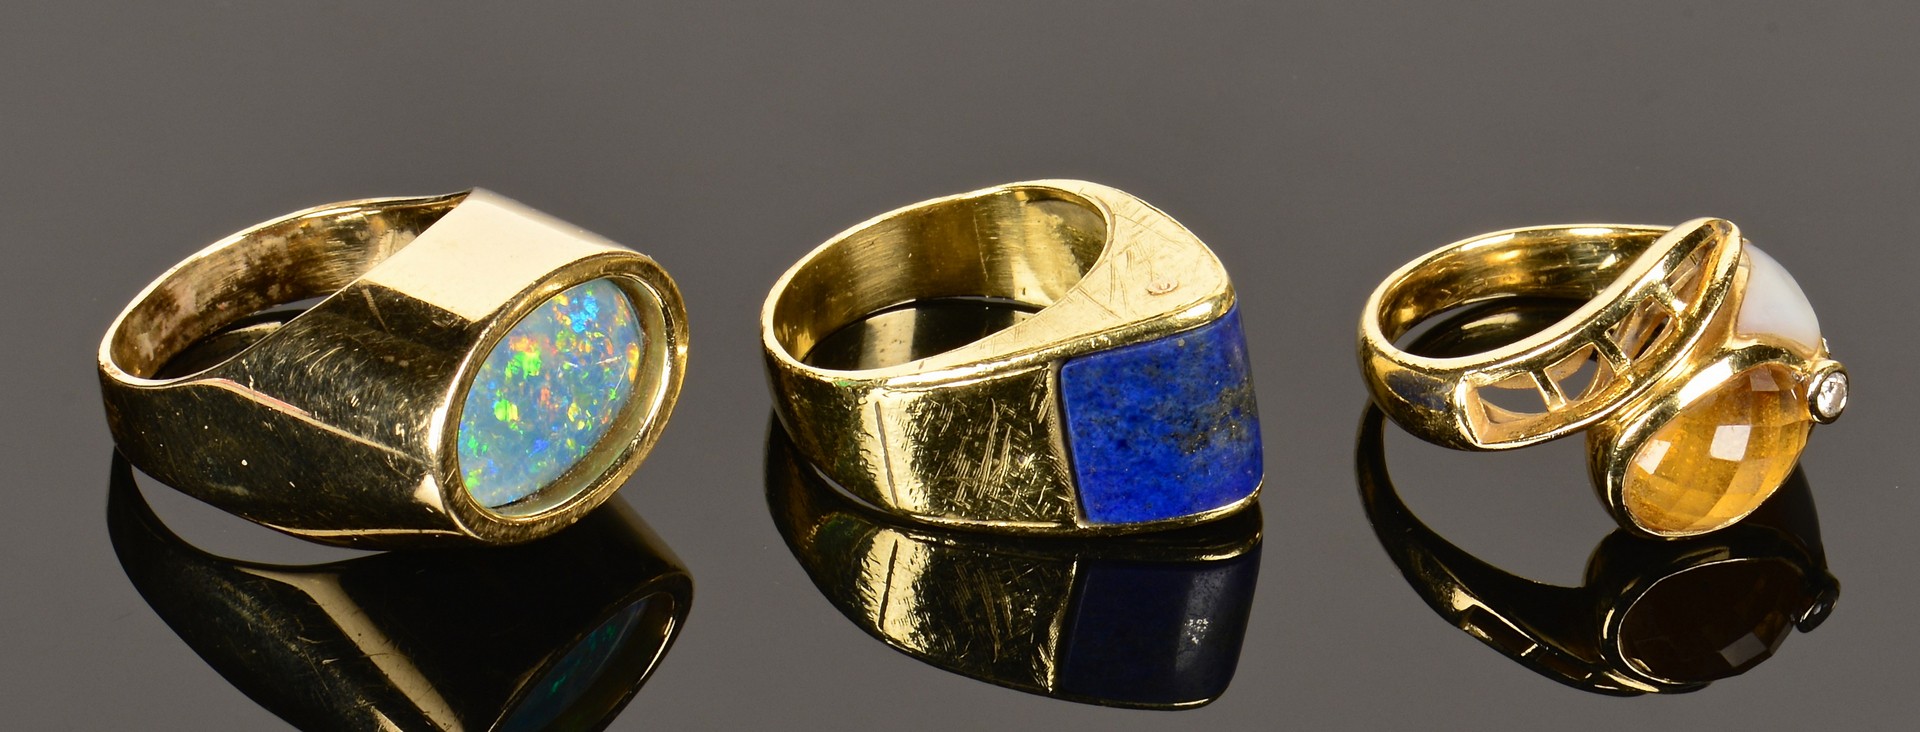 Lot 363: 14K and 18K Fashion Rings